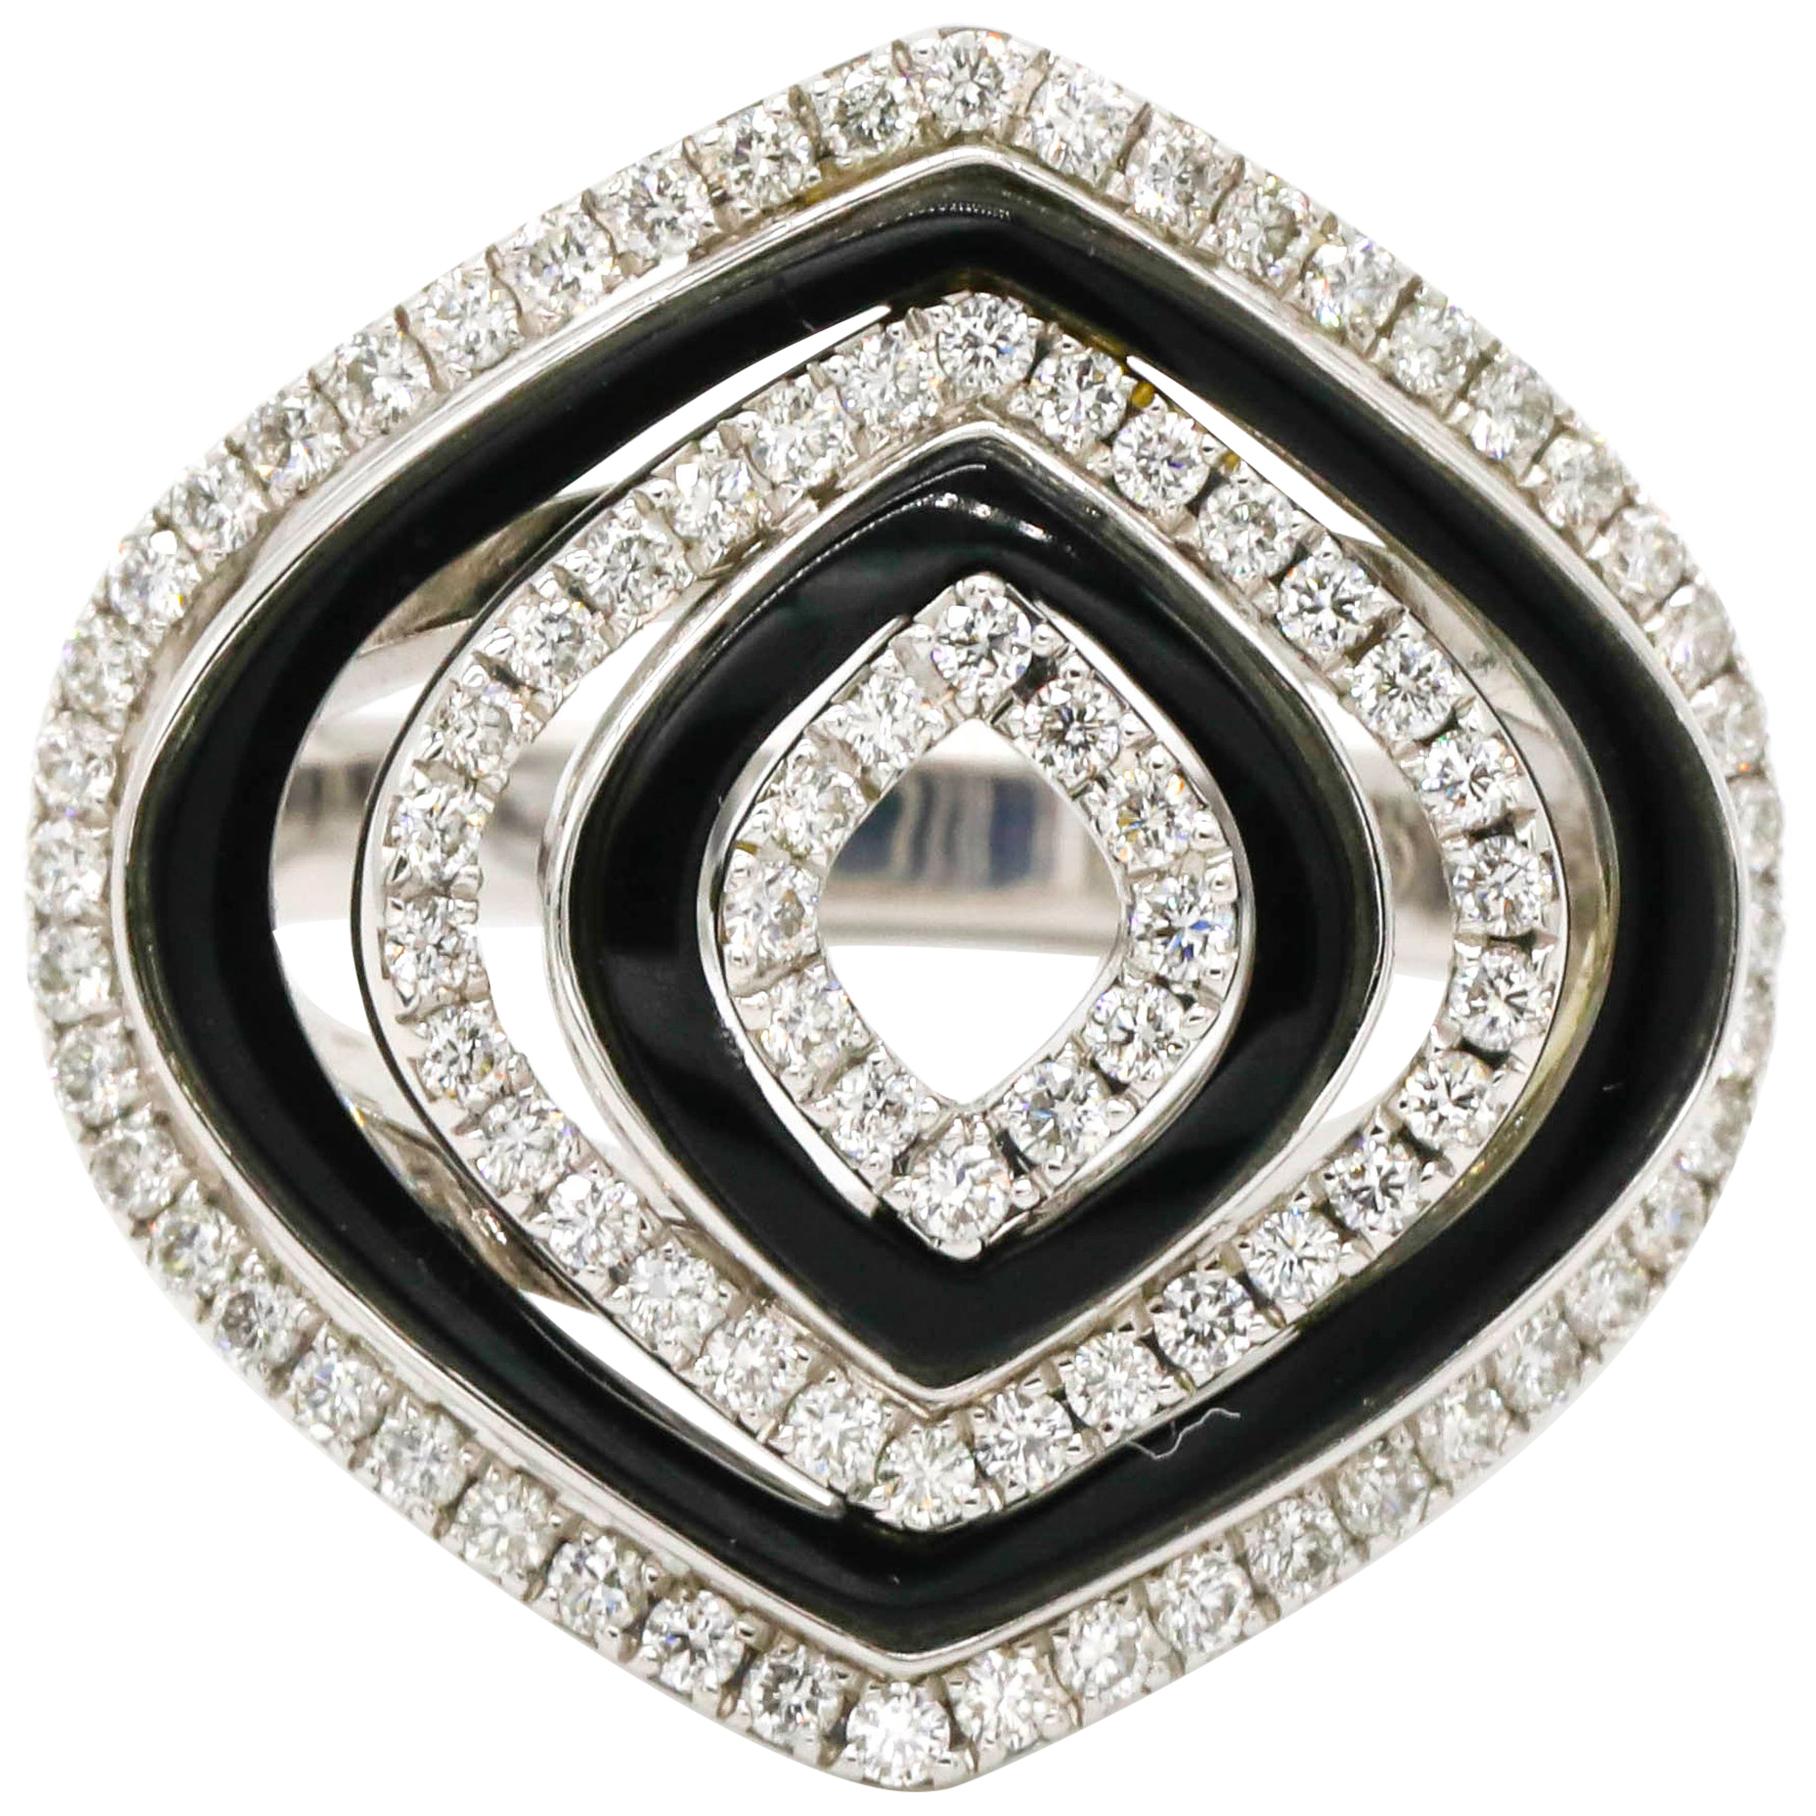 18 Karat White Gold 0.75 Carat Diamond Pave Black Onyx Cocktail Ring

This modern ring features a total of 0.75 carats of diamond round shape and Black Onyx Gemstone Set in 18K White Gold.

We guarantee all products sold and our number one priority